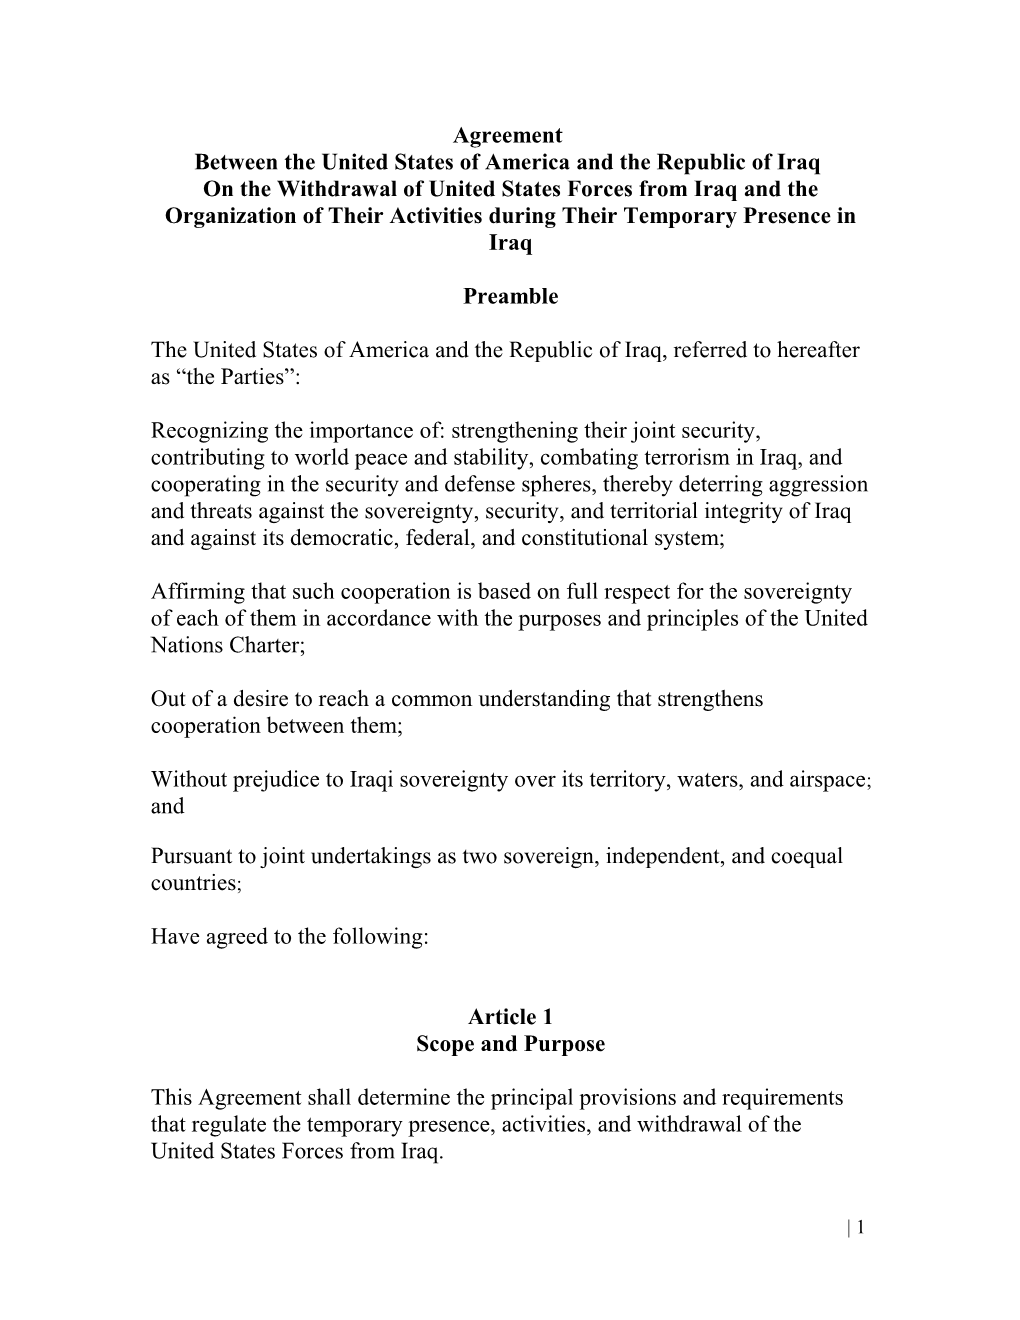 Agreement Between The United States Of America And The Republic Of Iraq On The Presence, Activities And Withdrawal Of U